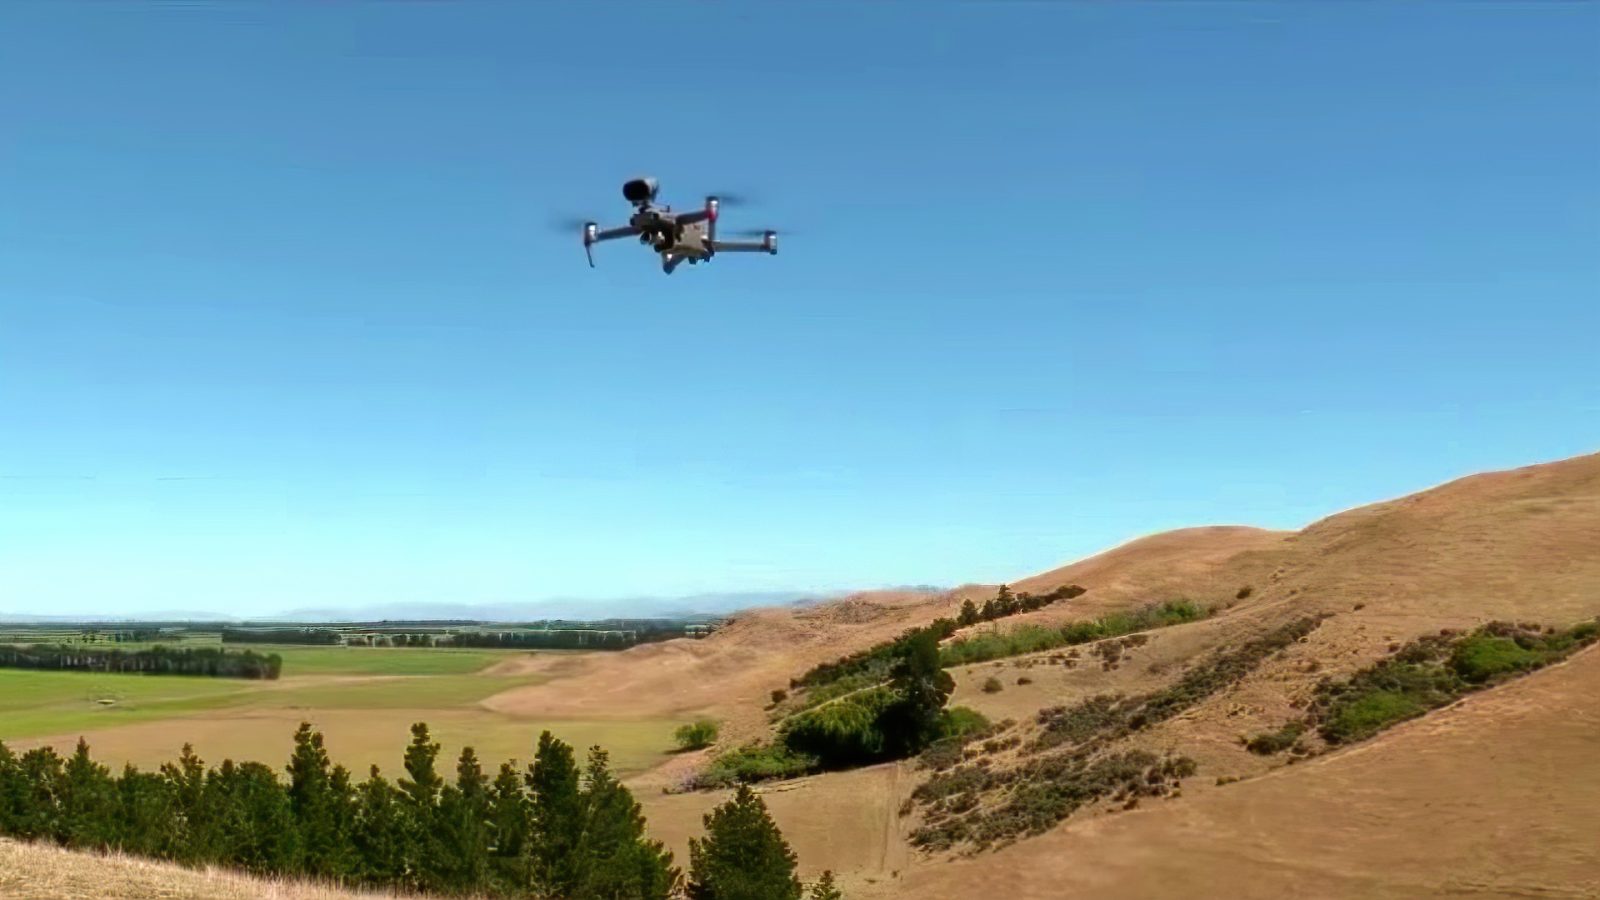 Herding sheep with a drone that barks like a dog